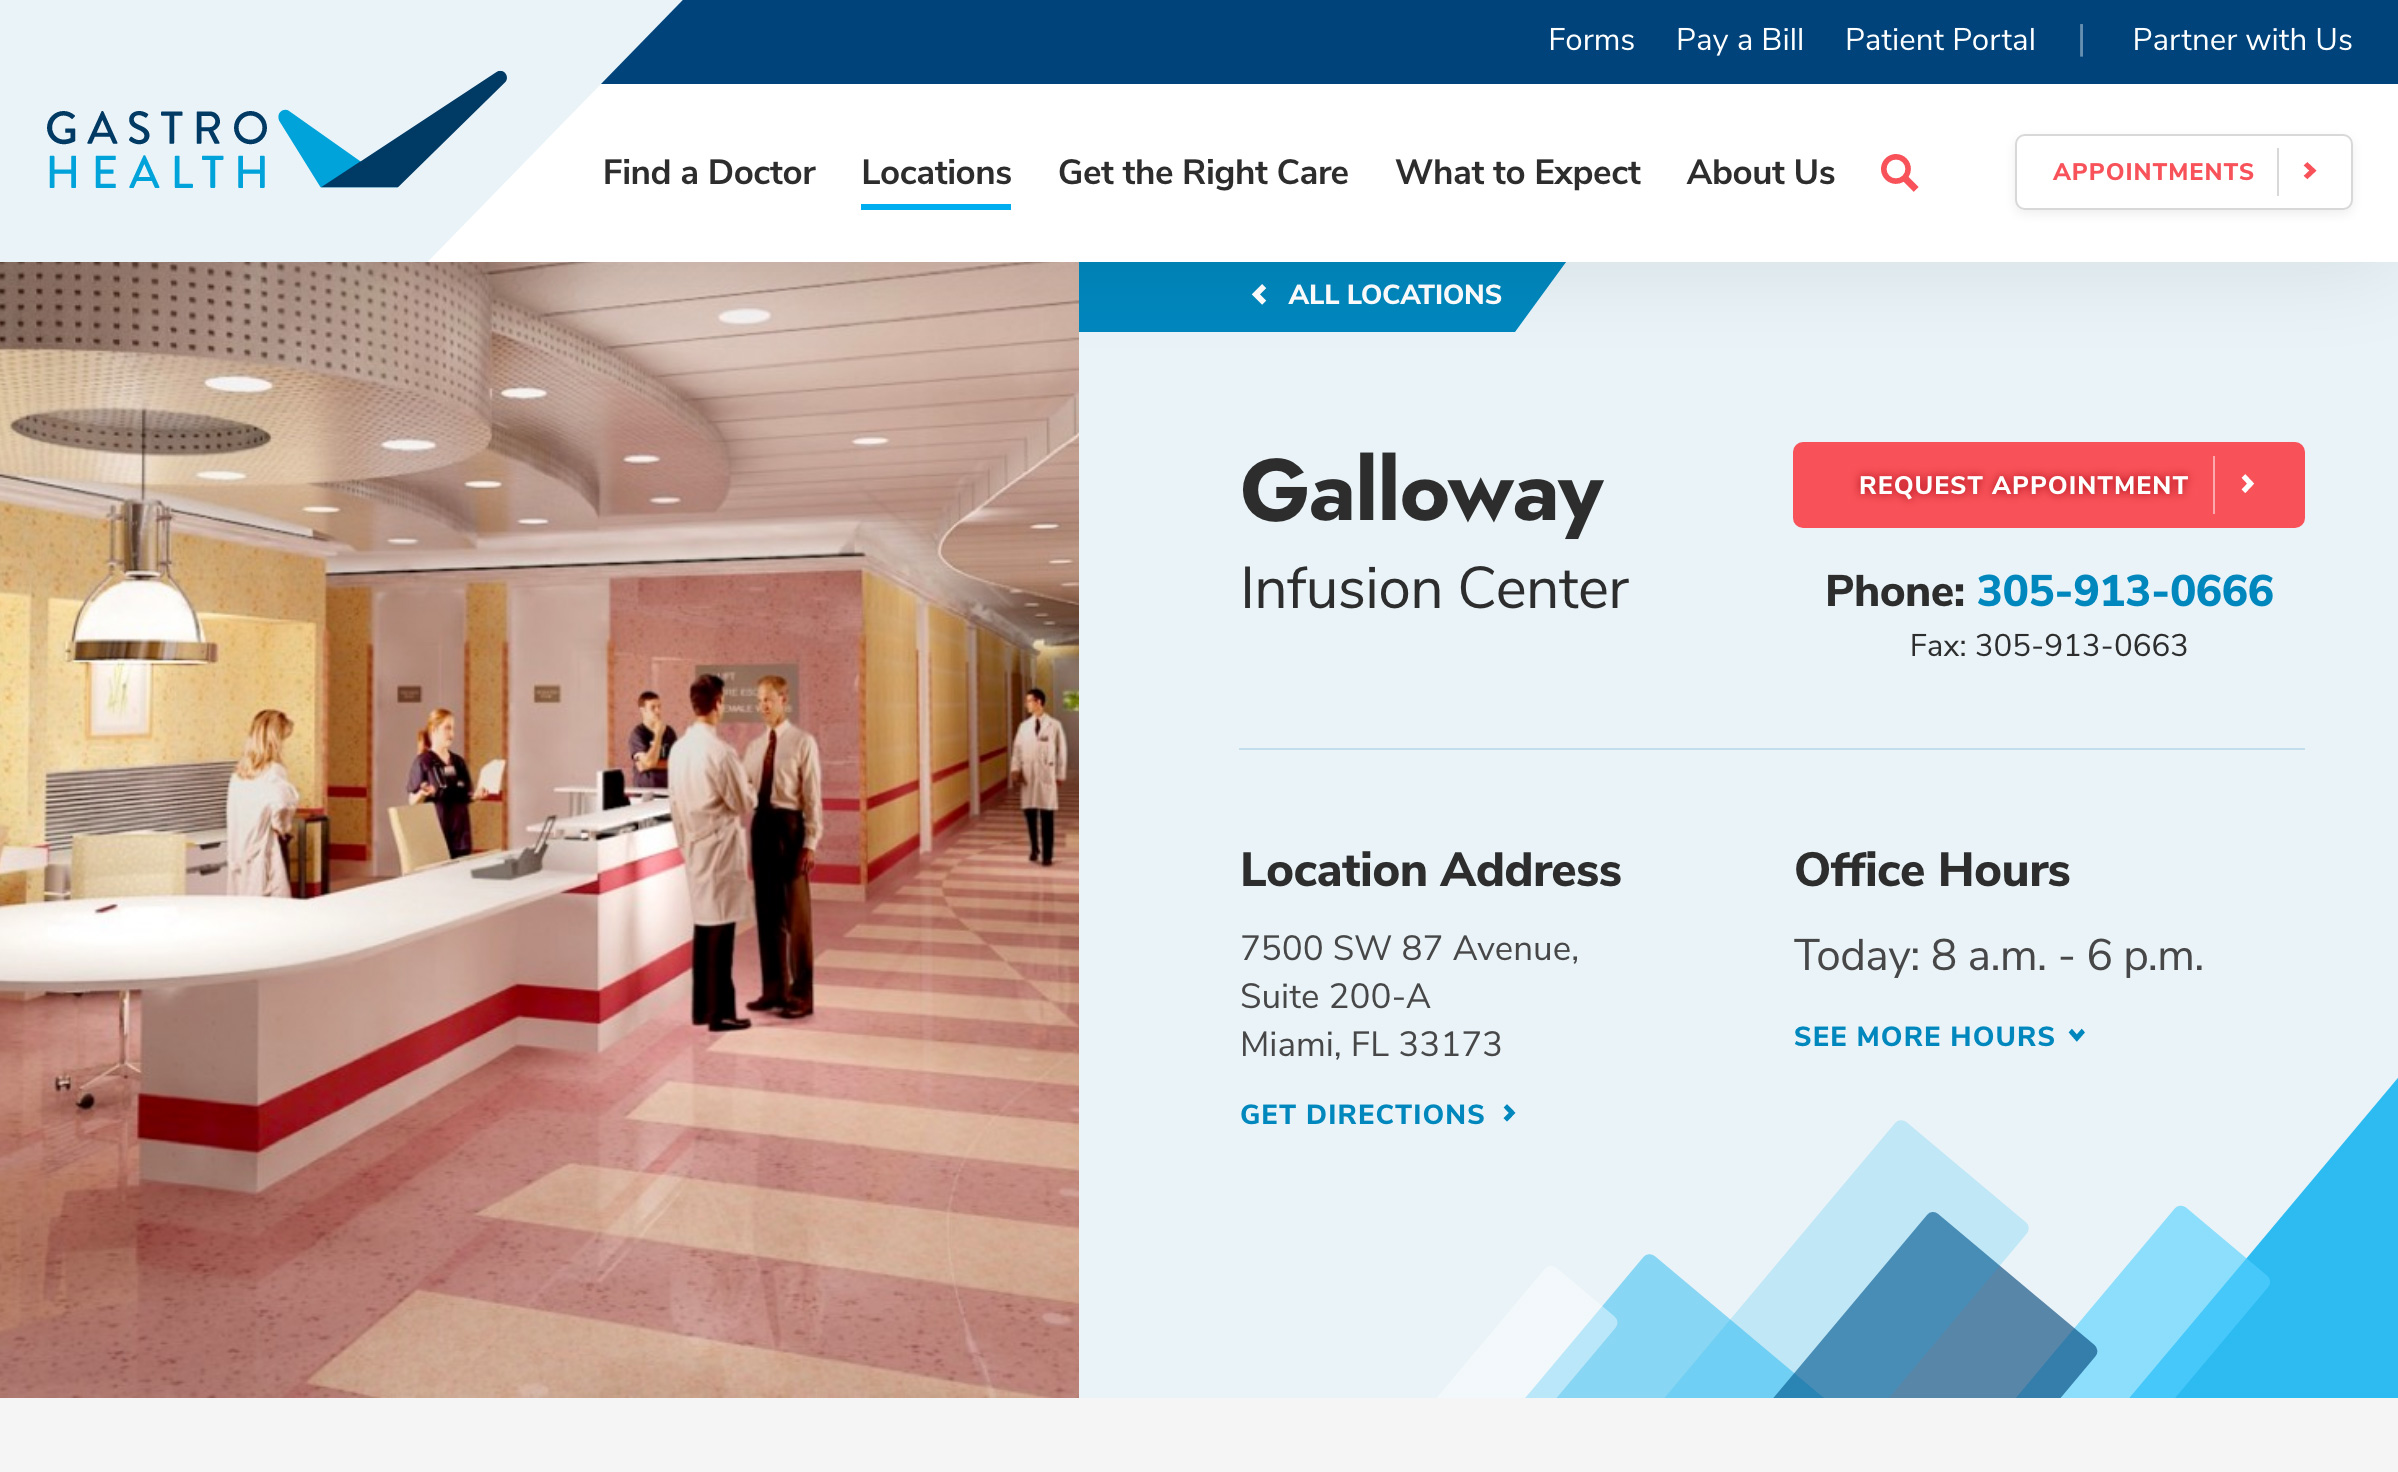 Image of the Gastro Health website locations page